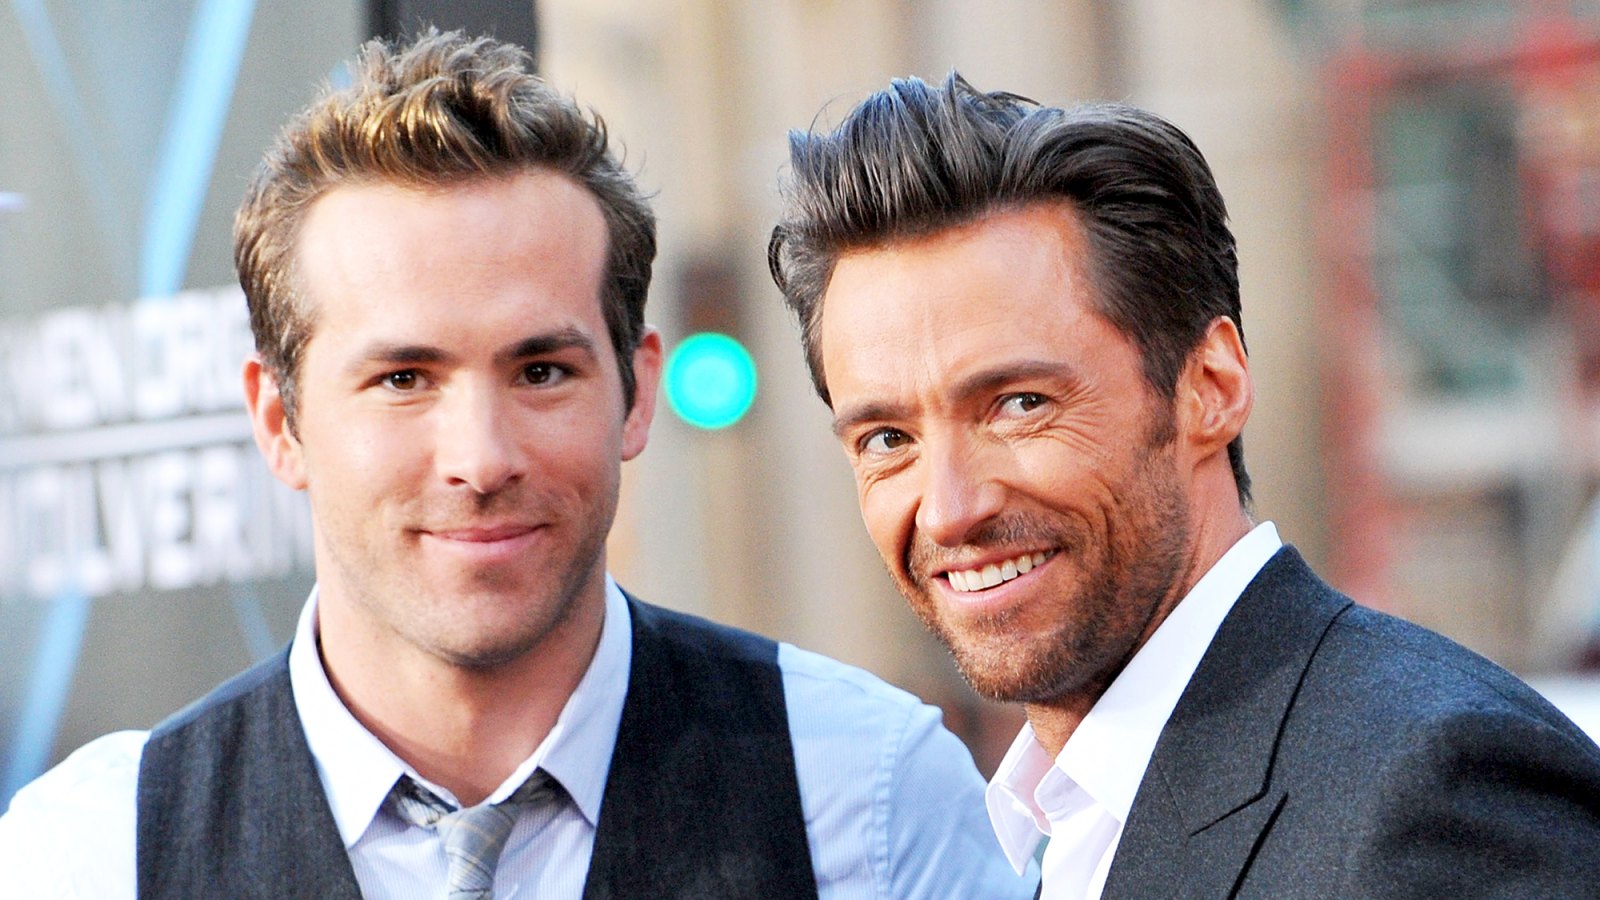 Ryan Reynolds and Hugh Jackman arrive at the Los Angeles Industry 2009 Screening "Xmen Origins: Wolverine" at Grauman's Chinese Theater in Hollywood, California.